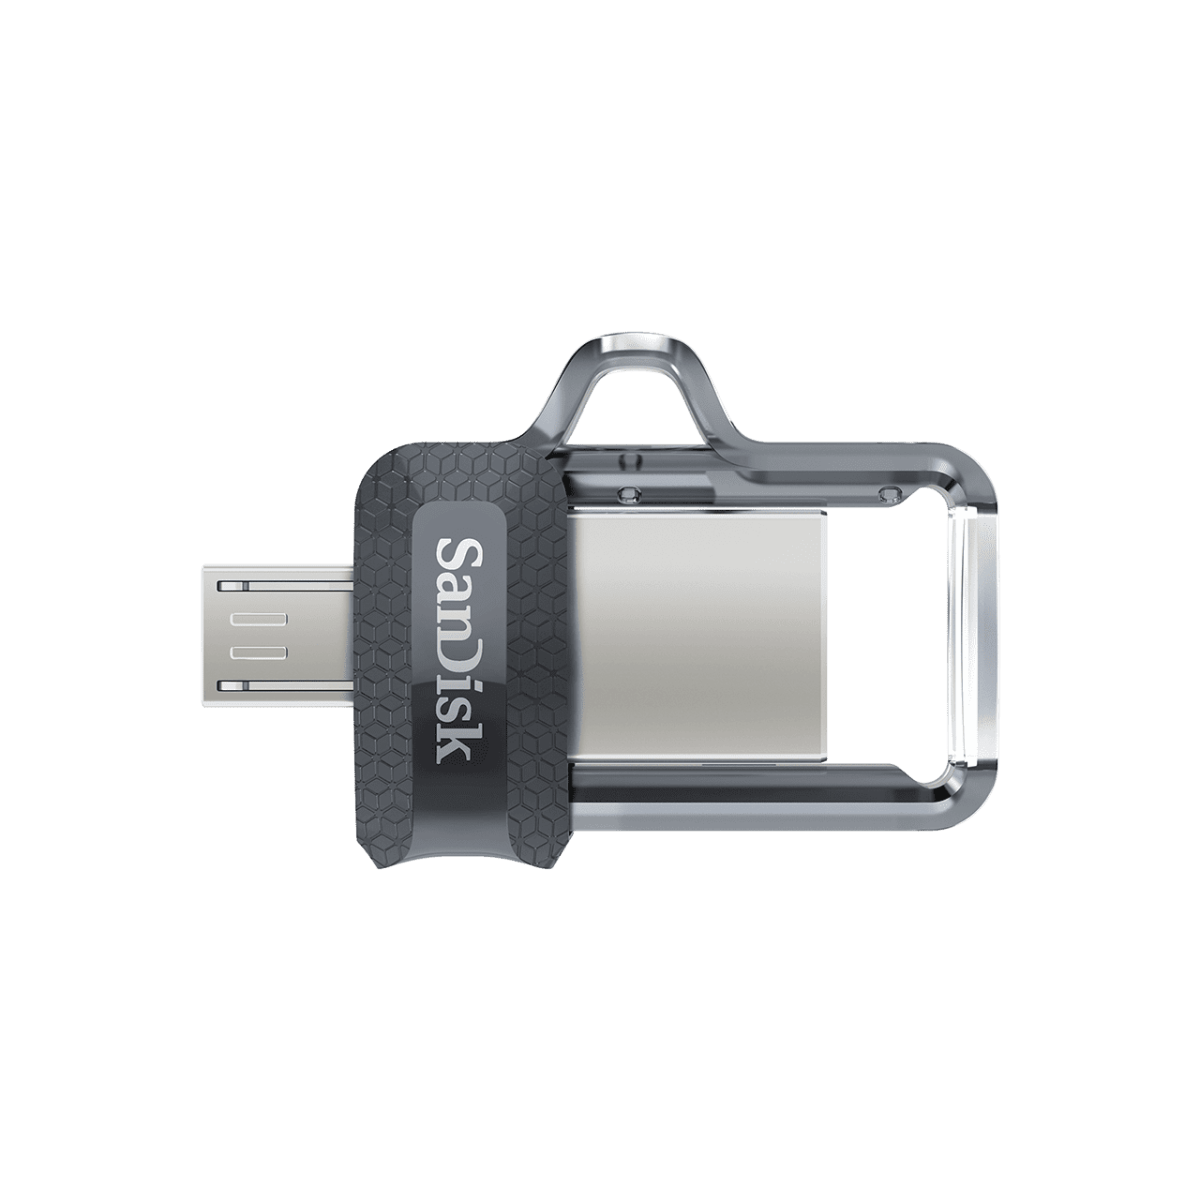 Ultra Dual Drive Usb M 3 Open Top2.Png.thumb .1280.1280 Sandisk &Lt;Div Class=&Quot;Active&Quot; Data-Sku=&Quot;Sddd3-016G-A46&Quot;&Gt; &Lt;H1&Gt;Instantly Free Up Space On Your Android Smartphone&Lt;/H1&Gt; &Lt;Div Class=&Quot;Inheritpara Mb-4&Quot;&Gt; The Sandisk Ultra® Dual Drive M3.0 Makes It Easy To Transfer Content From Your Phone To Your Computer. With A Micro-Usb Connector On One End And A Usb 3.0 Connector On The Other, The Drive Lets You Move Content Easily Between Your Devices—From Your Android™ Smartphone Or Tablet To Your Laptop, Pc Or Mac Computer&Lt;A Class=&Quot;Disclosure&Quot; Href=&Quot;Https://Shop.westerndigital.com/Products/Usb-Flash-Drives/Sandisk-Ultra-Dual-Drive-M30-Usb-3-0-Micro-Usb#Disclosures&Quot; Target=&Quot;_Self&Quot; Rel=&Quot;Noopener Noreferrer&Quot; Aria-Labelledby=&Quot;Disclosures&Quot;&Gt;&Lt;Sup&Gt;1&Lt;/Sup&Gt;&Lt;/A&Gt;. The Usb 3.0 Connector Is High-Performance And Backward-Compatible With Usb 2.0 Ports. The Sandisk® Memory Zone App&Lt;A Class=&Quot;Disclosure&Quot; Href=&Quot;Https://Shop.westerndigital.com/Products/Usb-Flash-Drives/Sandisk-Ultra-Dual-Drive-M30-Usb-3-0-Micro-Usb#Disclosures&Quot; Target=&Quot;_Self&Quot; Rel=&Quot;Noopener Noreferrer&Quot; Aria-Labelledby=&Quot;Disclosures&Quot;&Gt;&Lt;Sup&Gt;2&Lt;/Sup&Gt;&Lt;/A&Gt; For Android (Available On Google Play) Helps You Manage Your Device’s Memory And Your Content. &Lt;Strong&Gt;Warranty&Lt;/Strong&Gt; The Sandisk Ultra Flair Usb 3.0 Flash Drive Is Backed By A Five-Year Manufacturer Warranty&Lt;A Class=&Quot;Disclosure&Quot; Href=&Quot;Https://Shop.westerndigital.com/Products/Usb-Flash-Drives/Sandisk-Ultra-Flair-Usb-3-0#Disclosures&Quot; Target=&Quot;_Self&Quot; Rel=&Quot;Noopener Noreferrer&Quot; Aria-Labelledby=&Quot;Disclosures&Quot;&Gt;&Lt;Sup&Gt;2&Lt;/Sup&Gt;&Lt;/A&Gt; &Lt;/Div&Gt; &Lt;/Div&Gt; Sandisk Ultra Dual Drive M3.0 Flash Drive For Android Smartphones (64Gb)